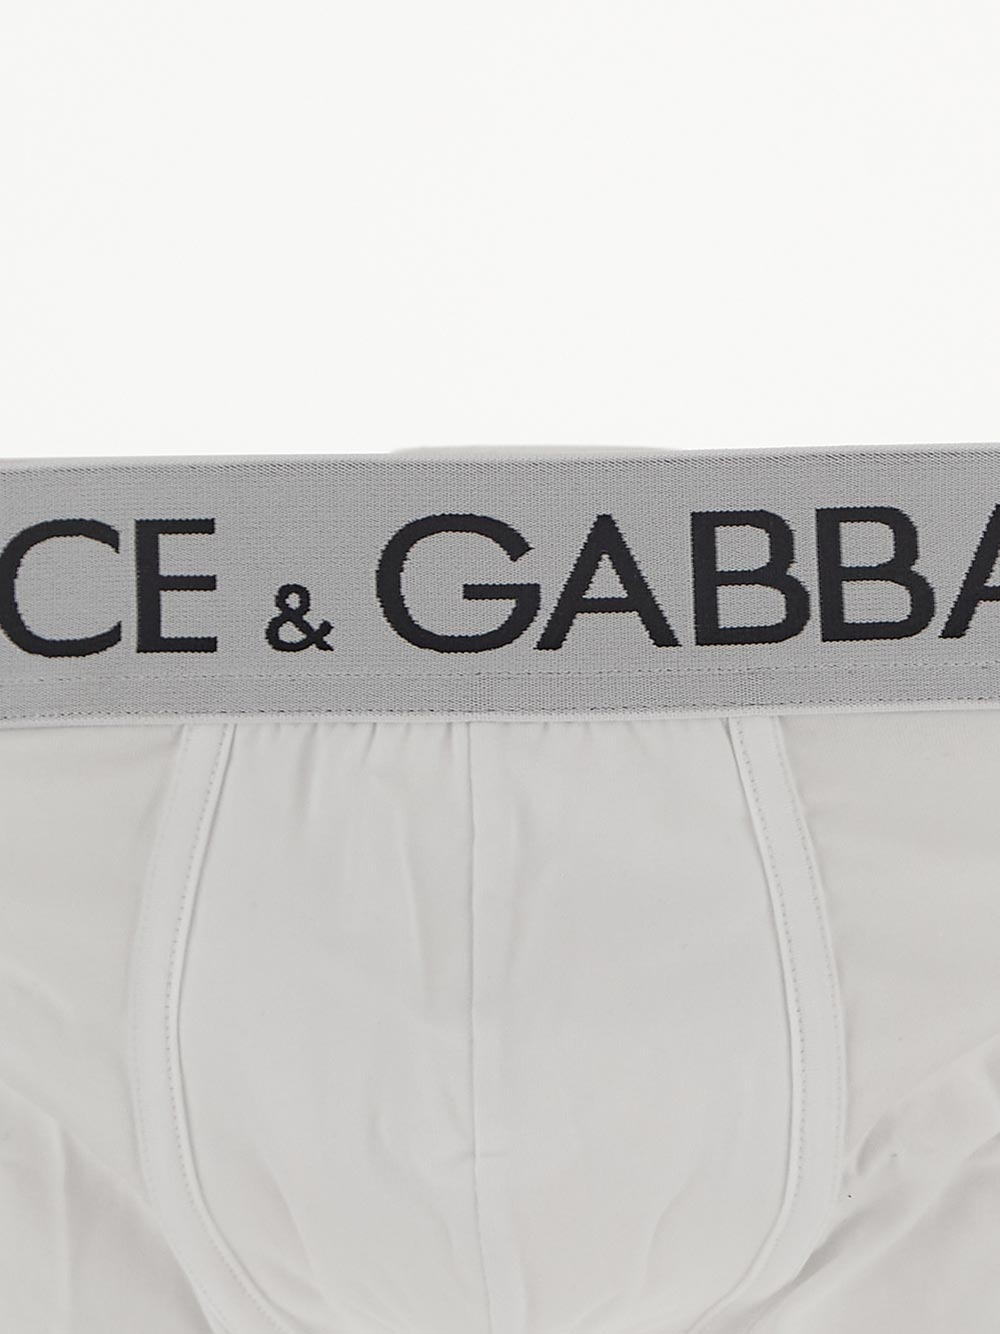 Dolce & Gabbana Two-Way-Stretch Cotton Jersey Regular-Fit Boxers